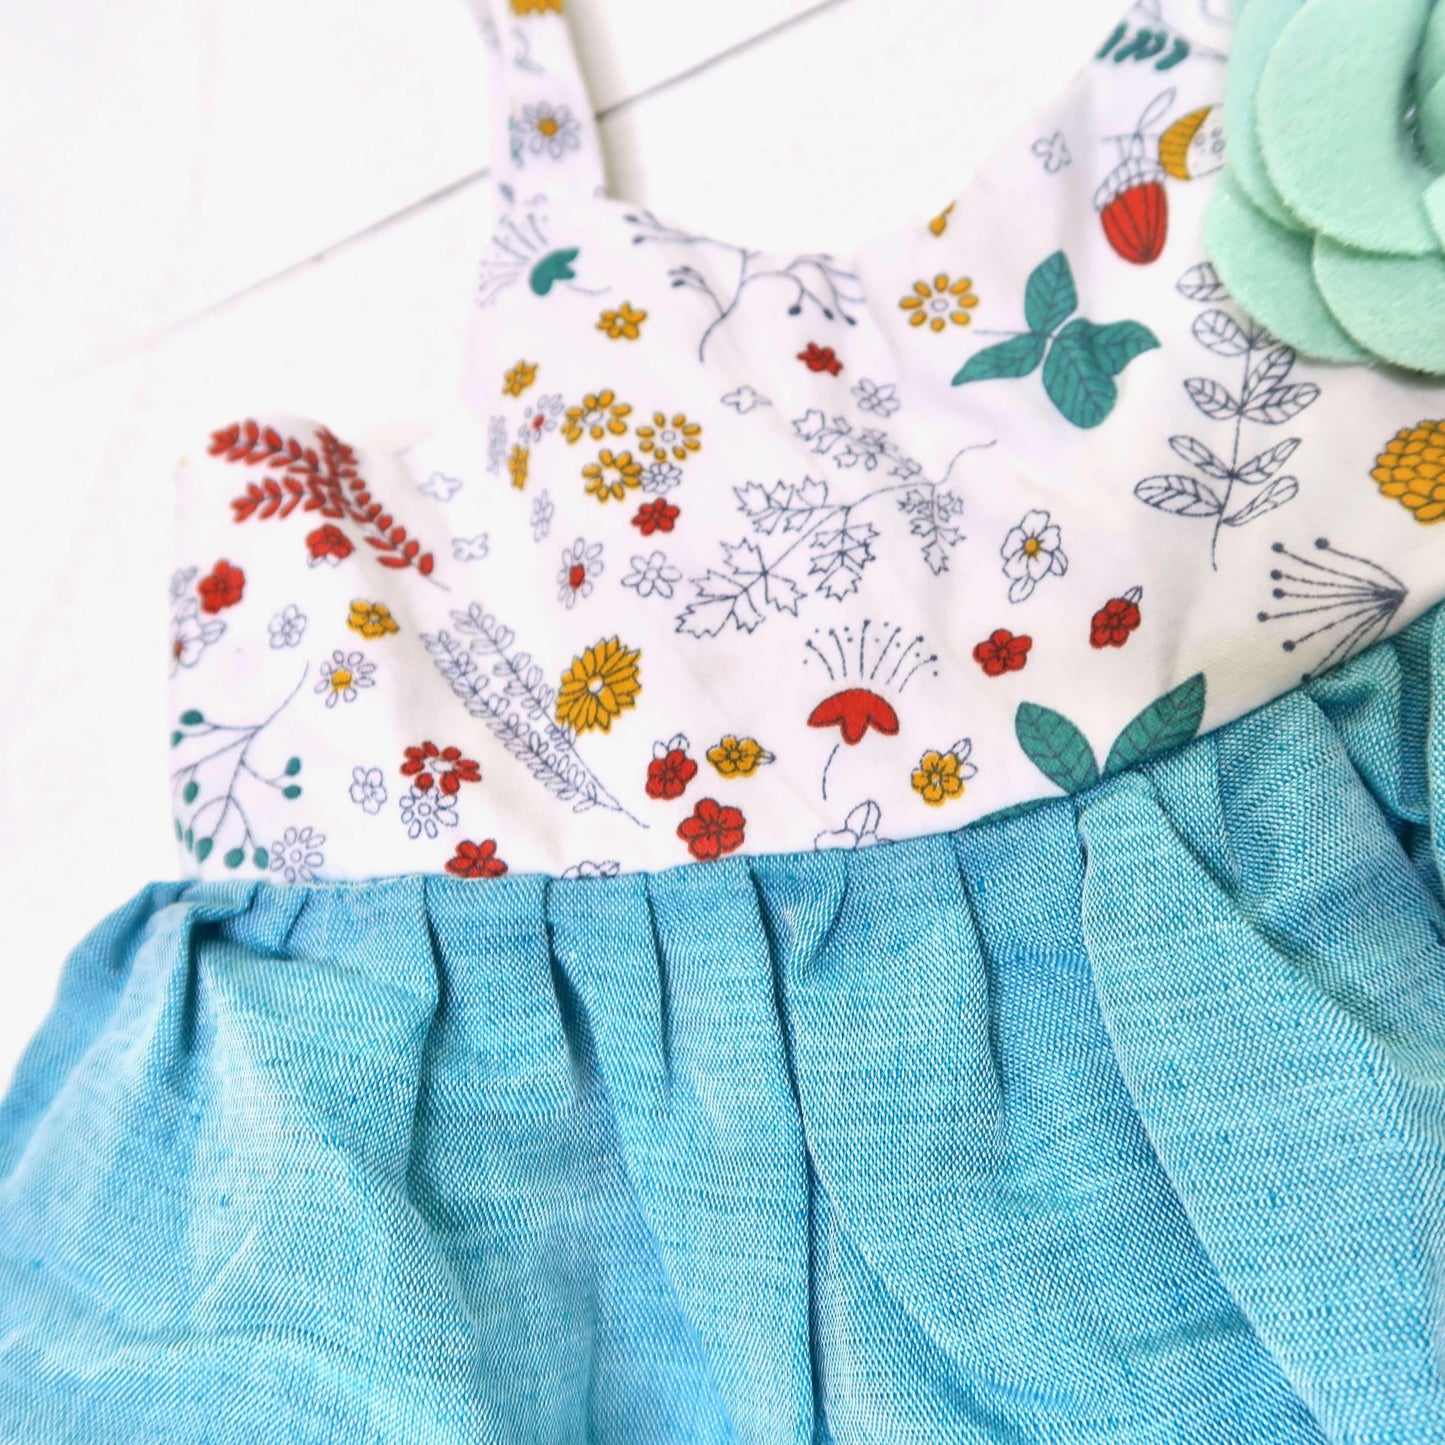 Dahlia Dress in Into the Garden and Teal Linen - Lil' Tati